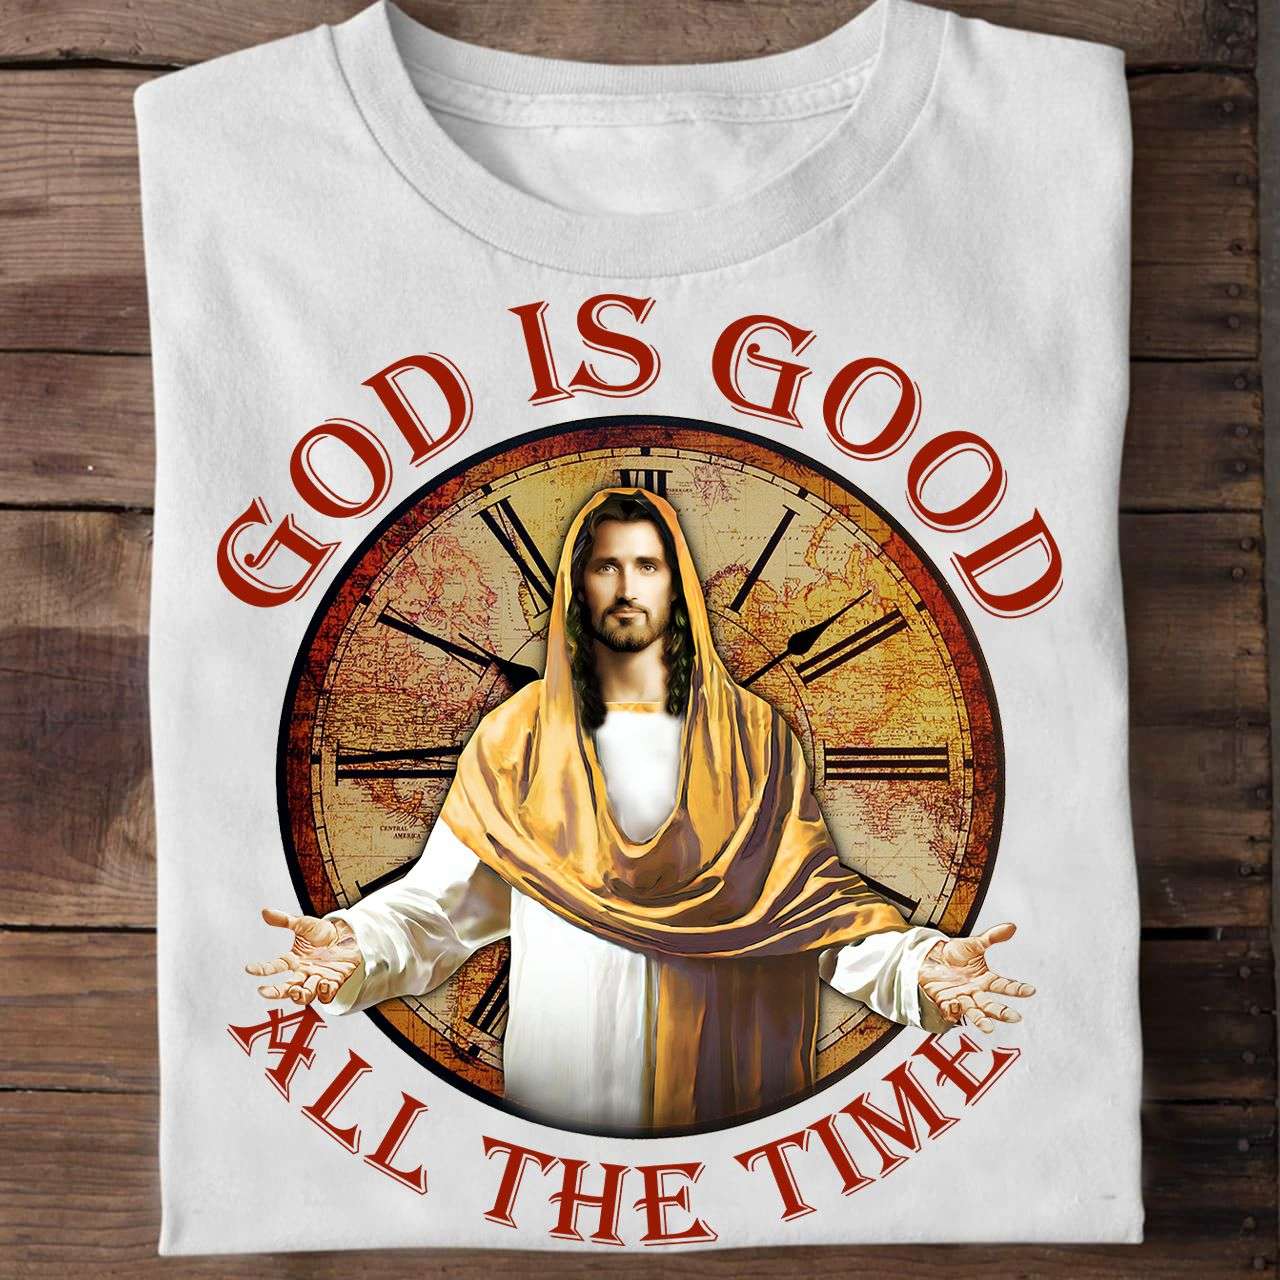 Christ Jesus - God is good all the time